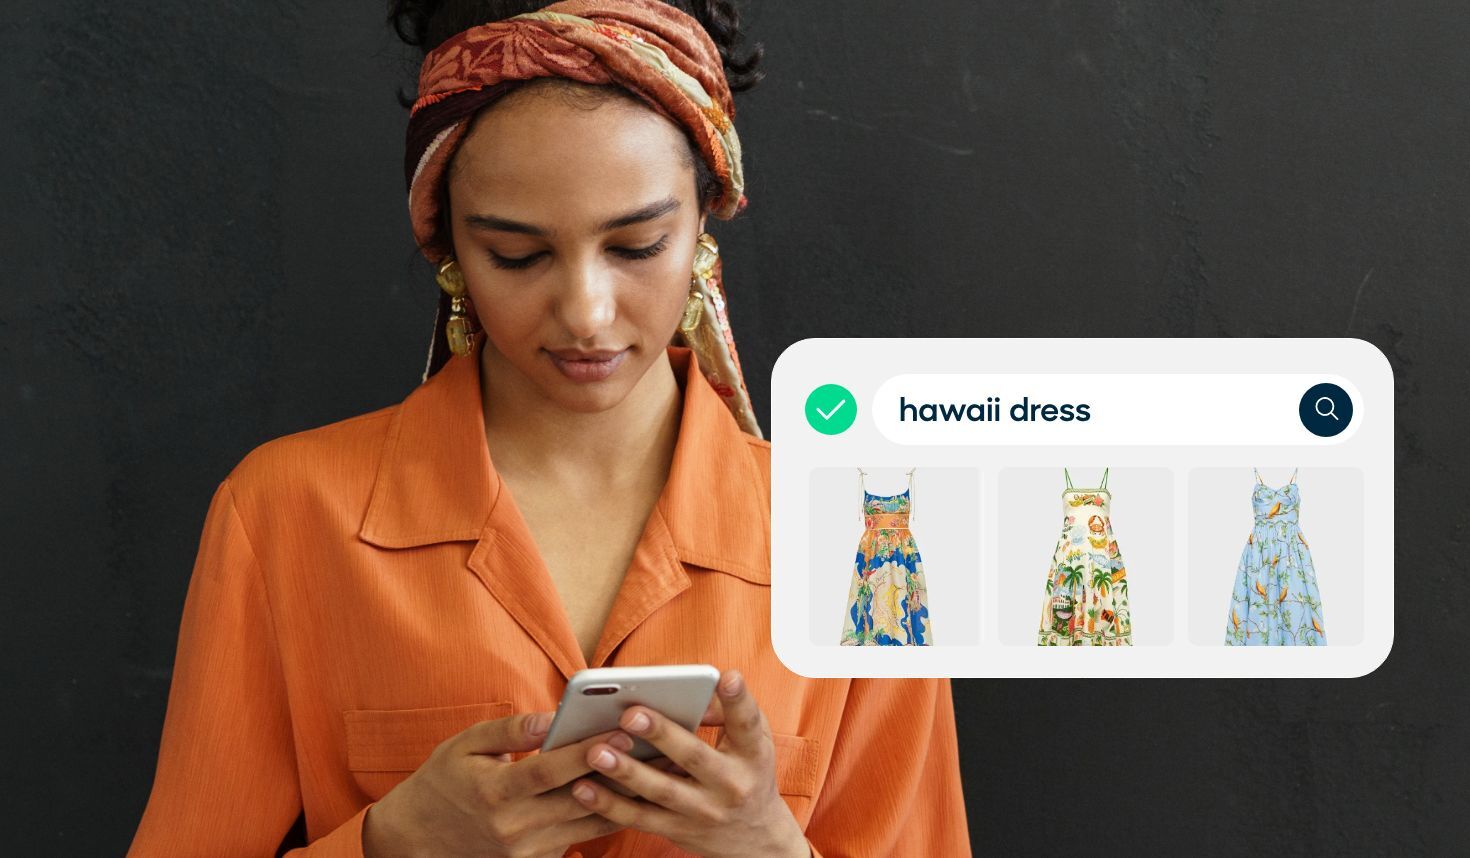 Using fine-tuned AI to provide hyper-personalized product recommendations